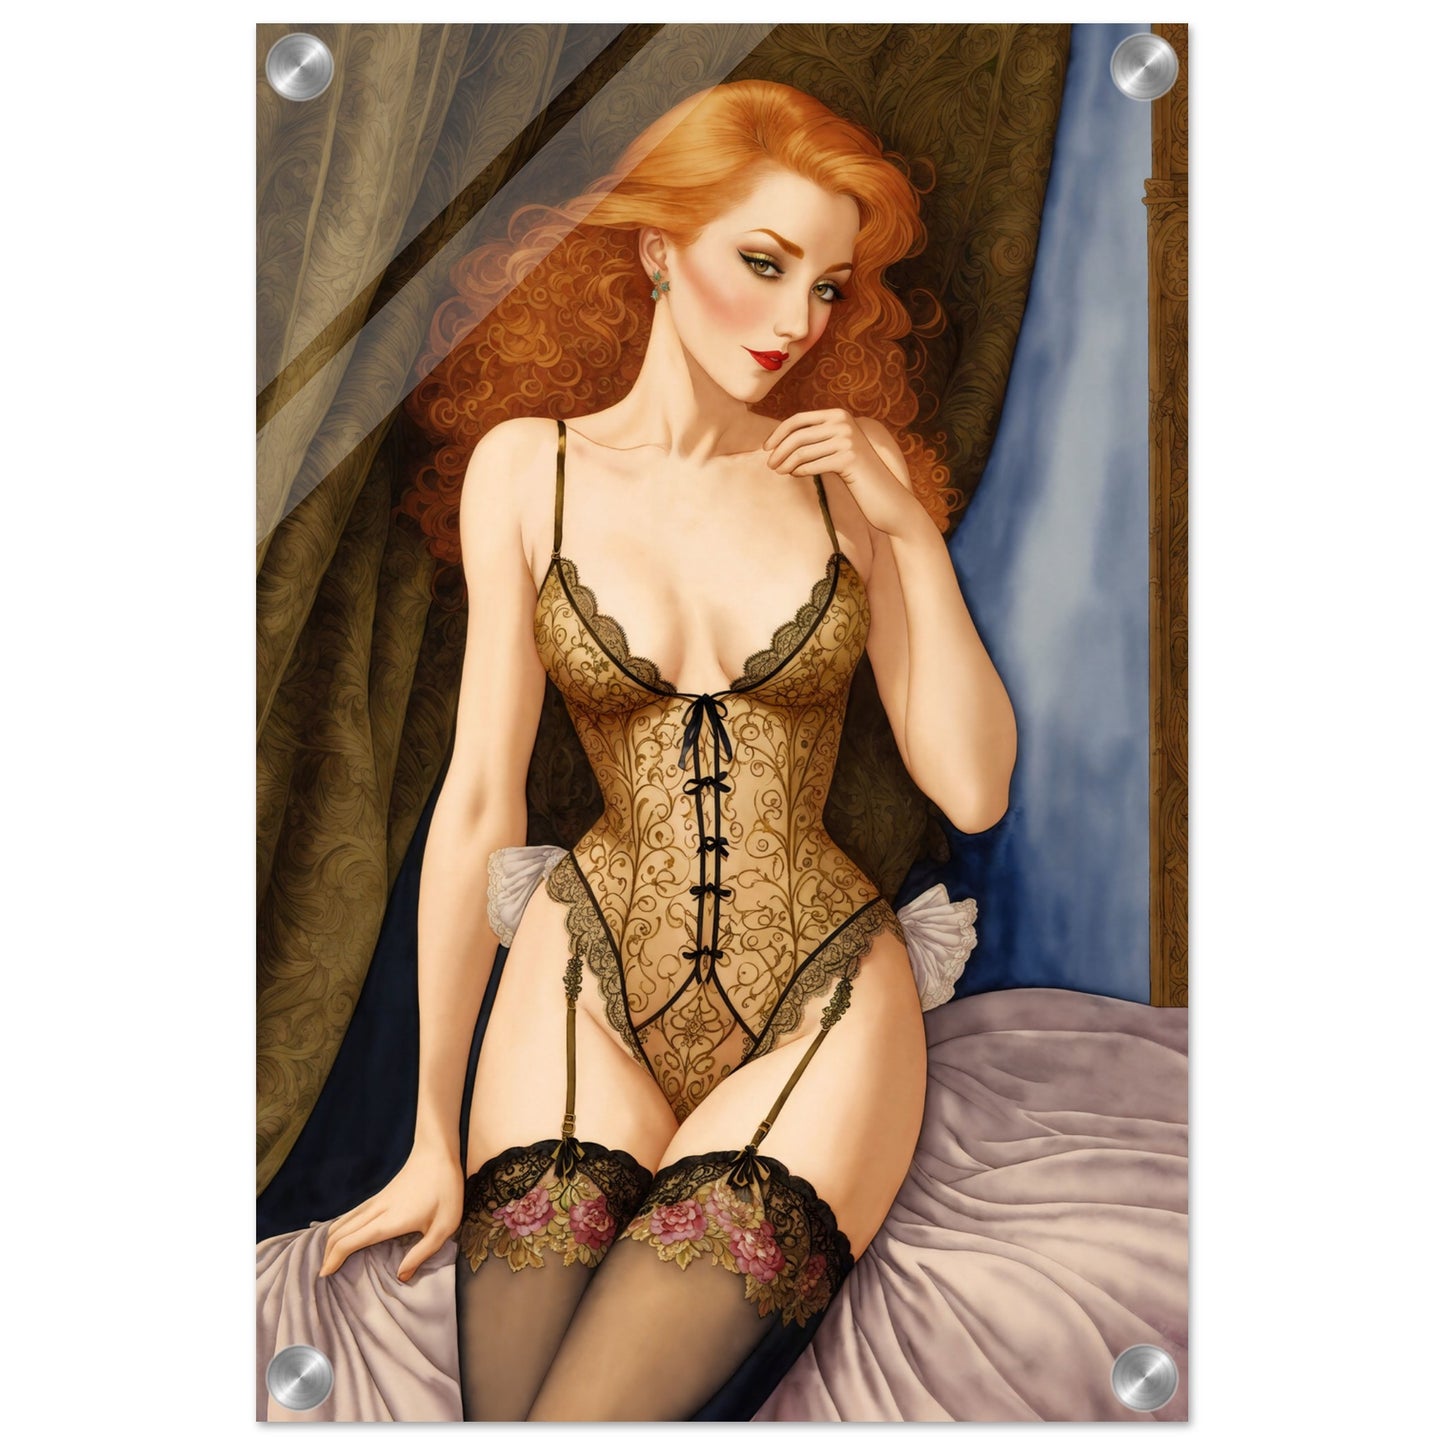 The Daily Pinup #85 - Intricate Lace Wall Art